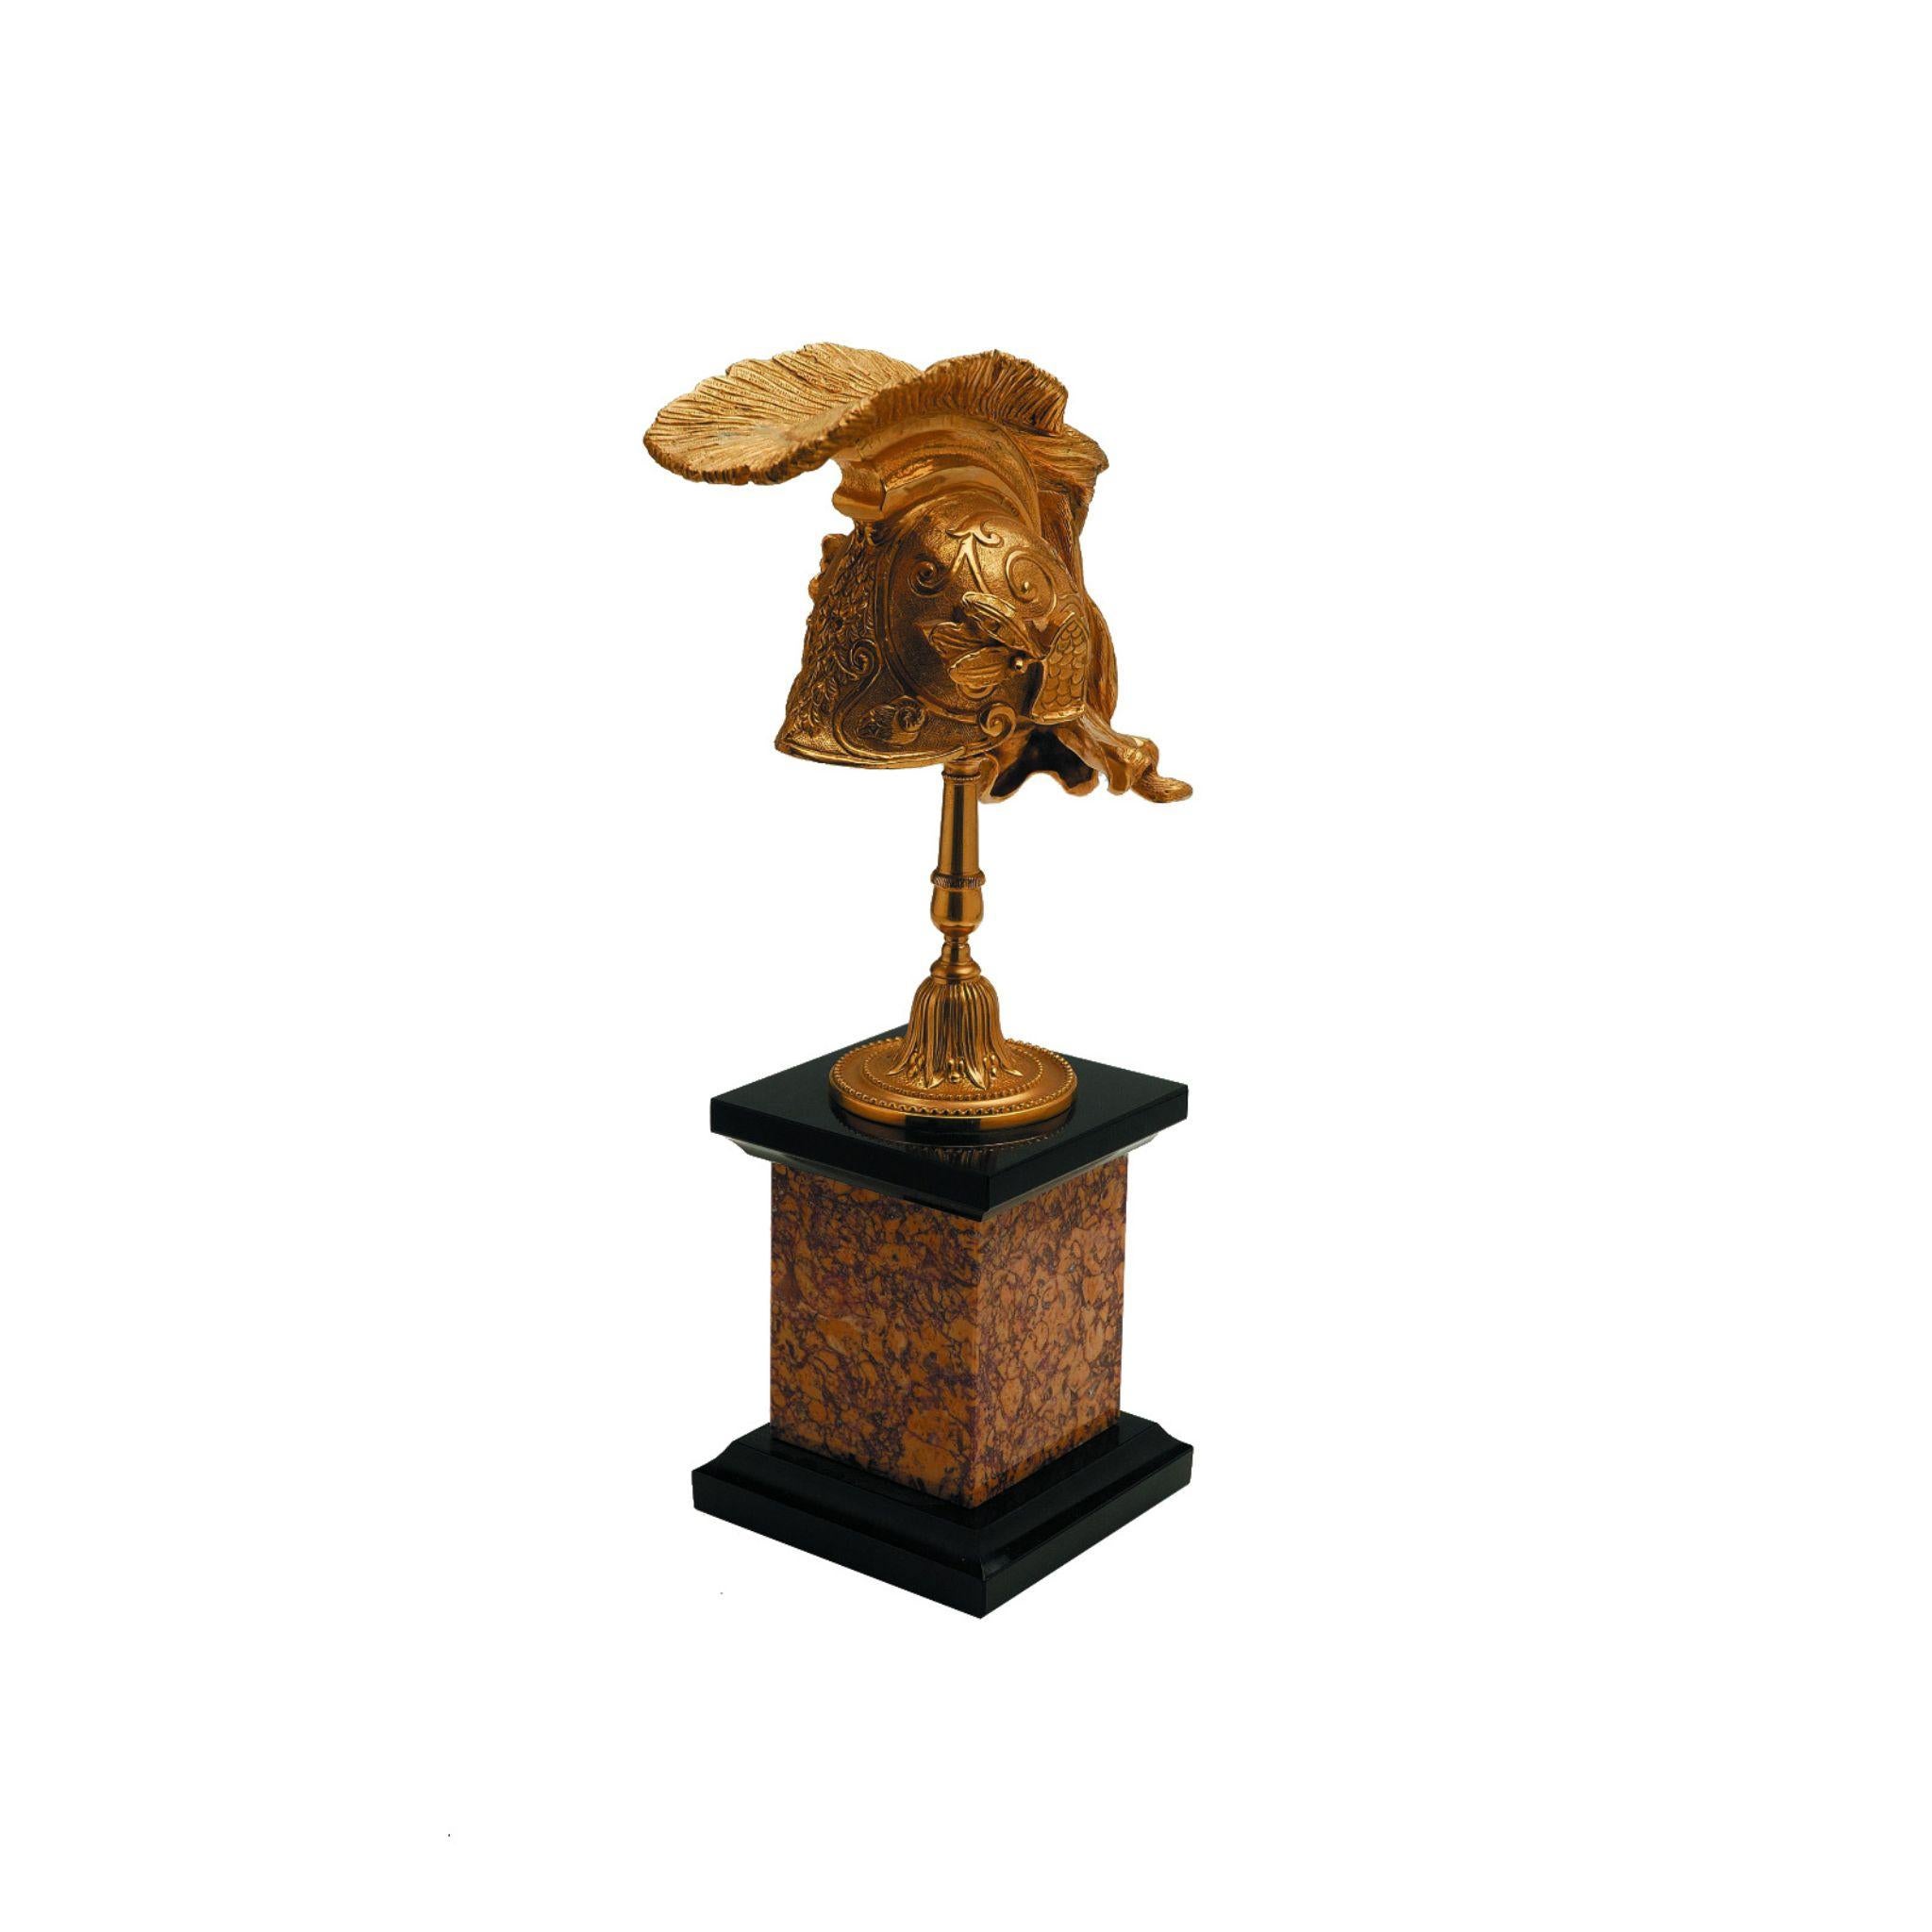 This stunning decorative brass helm is a must-have for any nautical enthusiast! Made from high-quality brass, it boasts intricate detailing and a sleek, sophisticated design that is sure to make a statement in any room. The black and brown marble